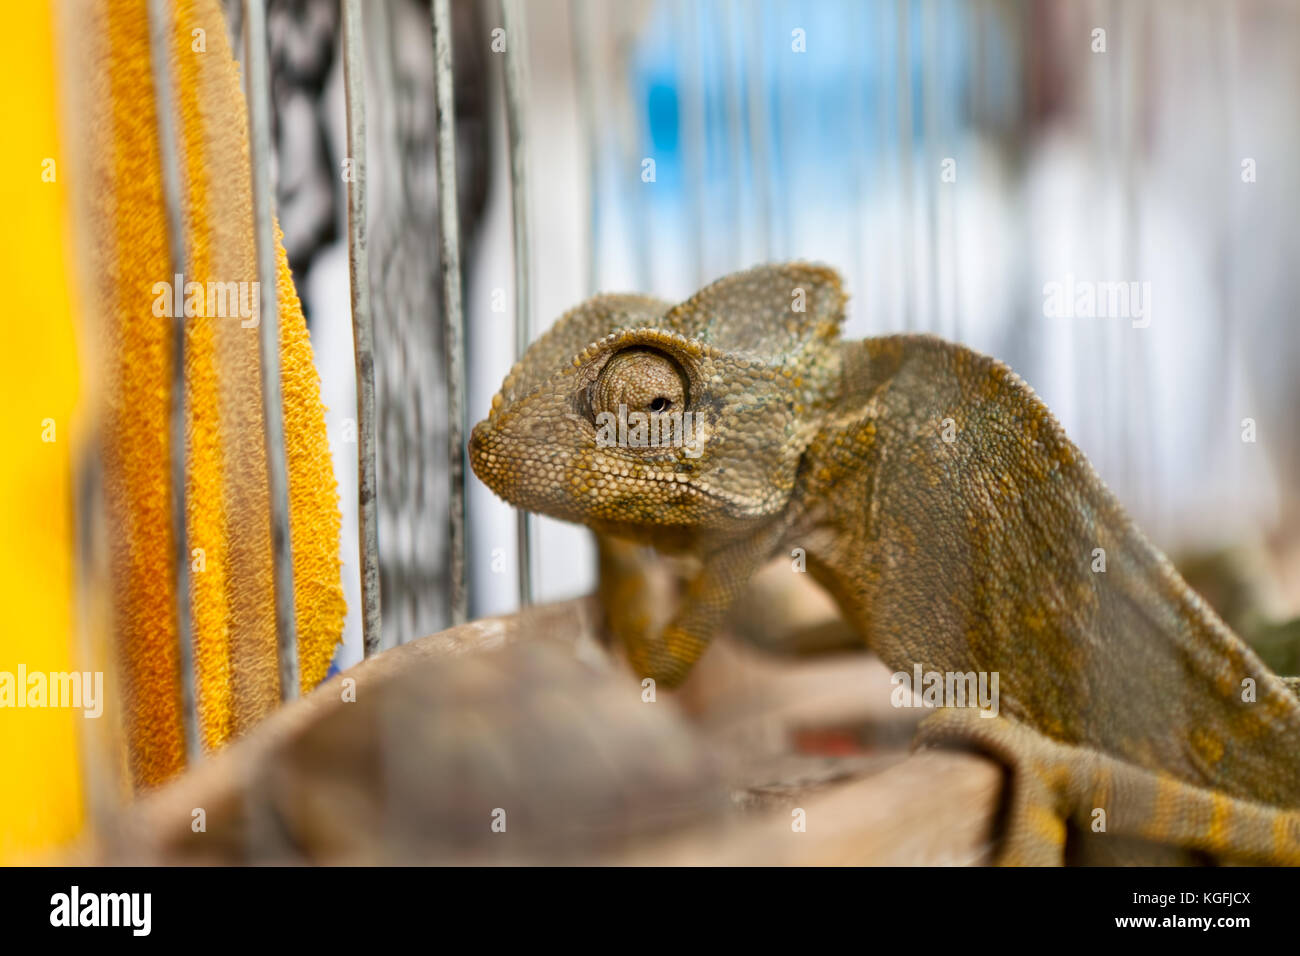 Chameleon standing next yellow textile and chancing color Stock Photo